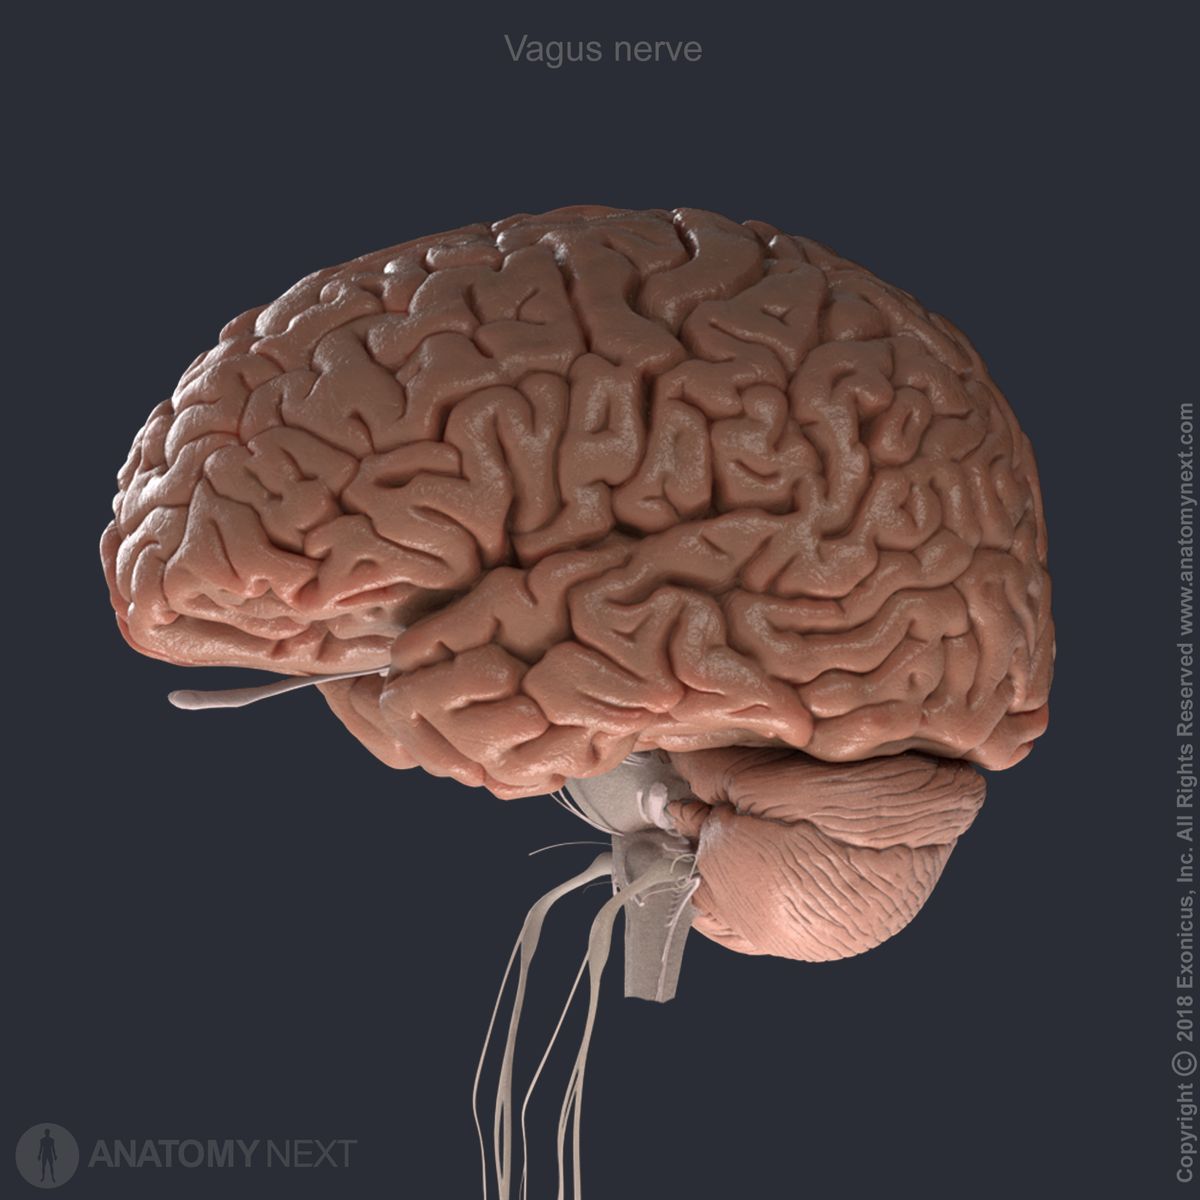 Upper part of vagus nerve, tenth cranial nerve, CN X, in relation to brain